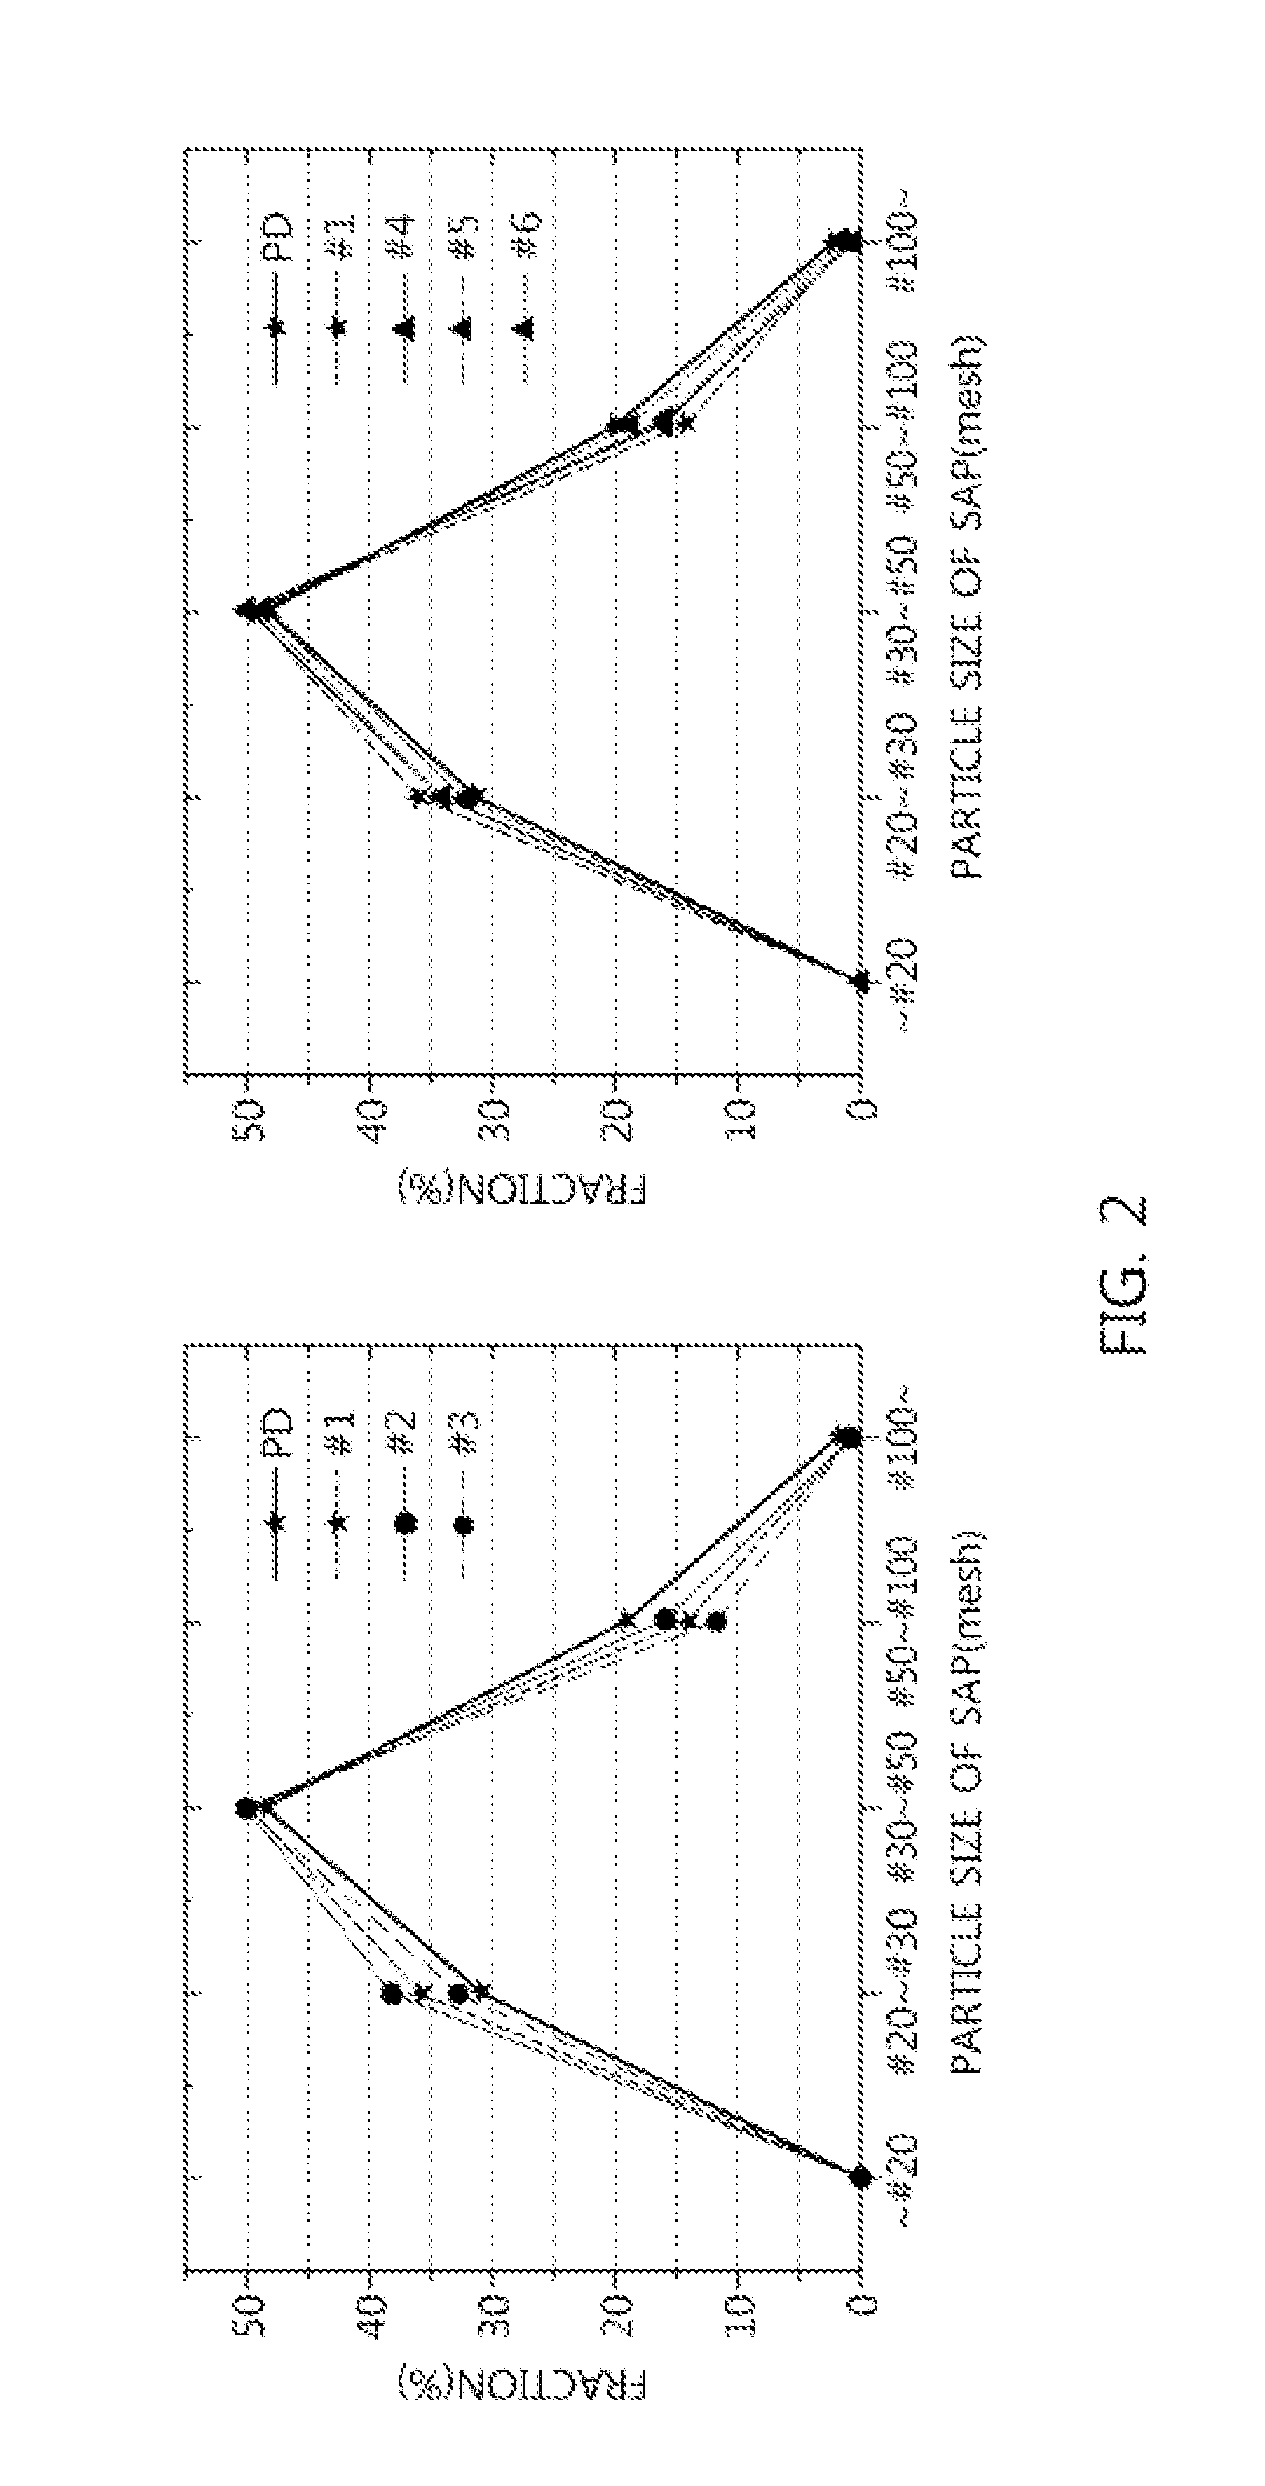 Attrition-resistant superabsorbent polymer and method for producing same